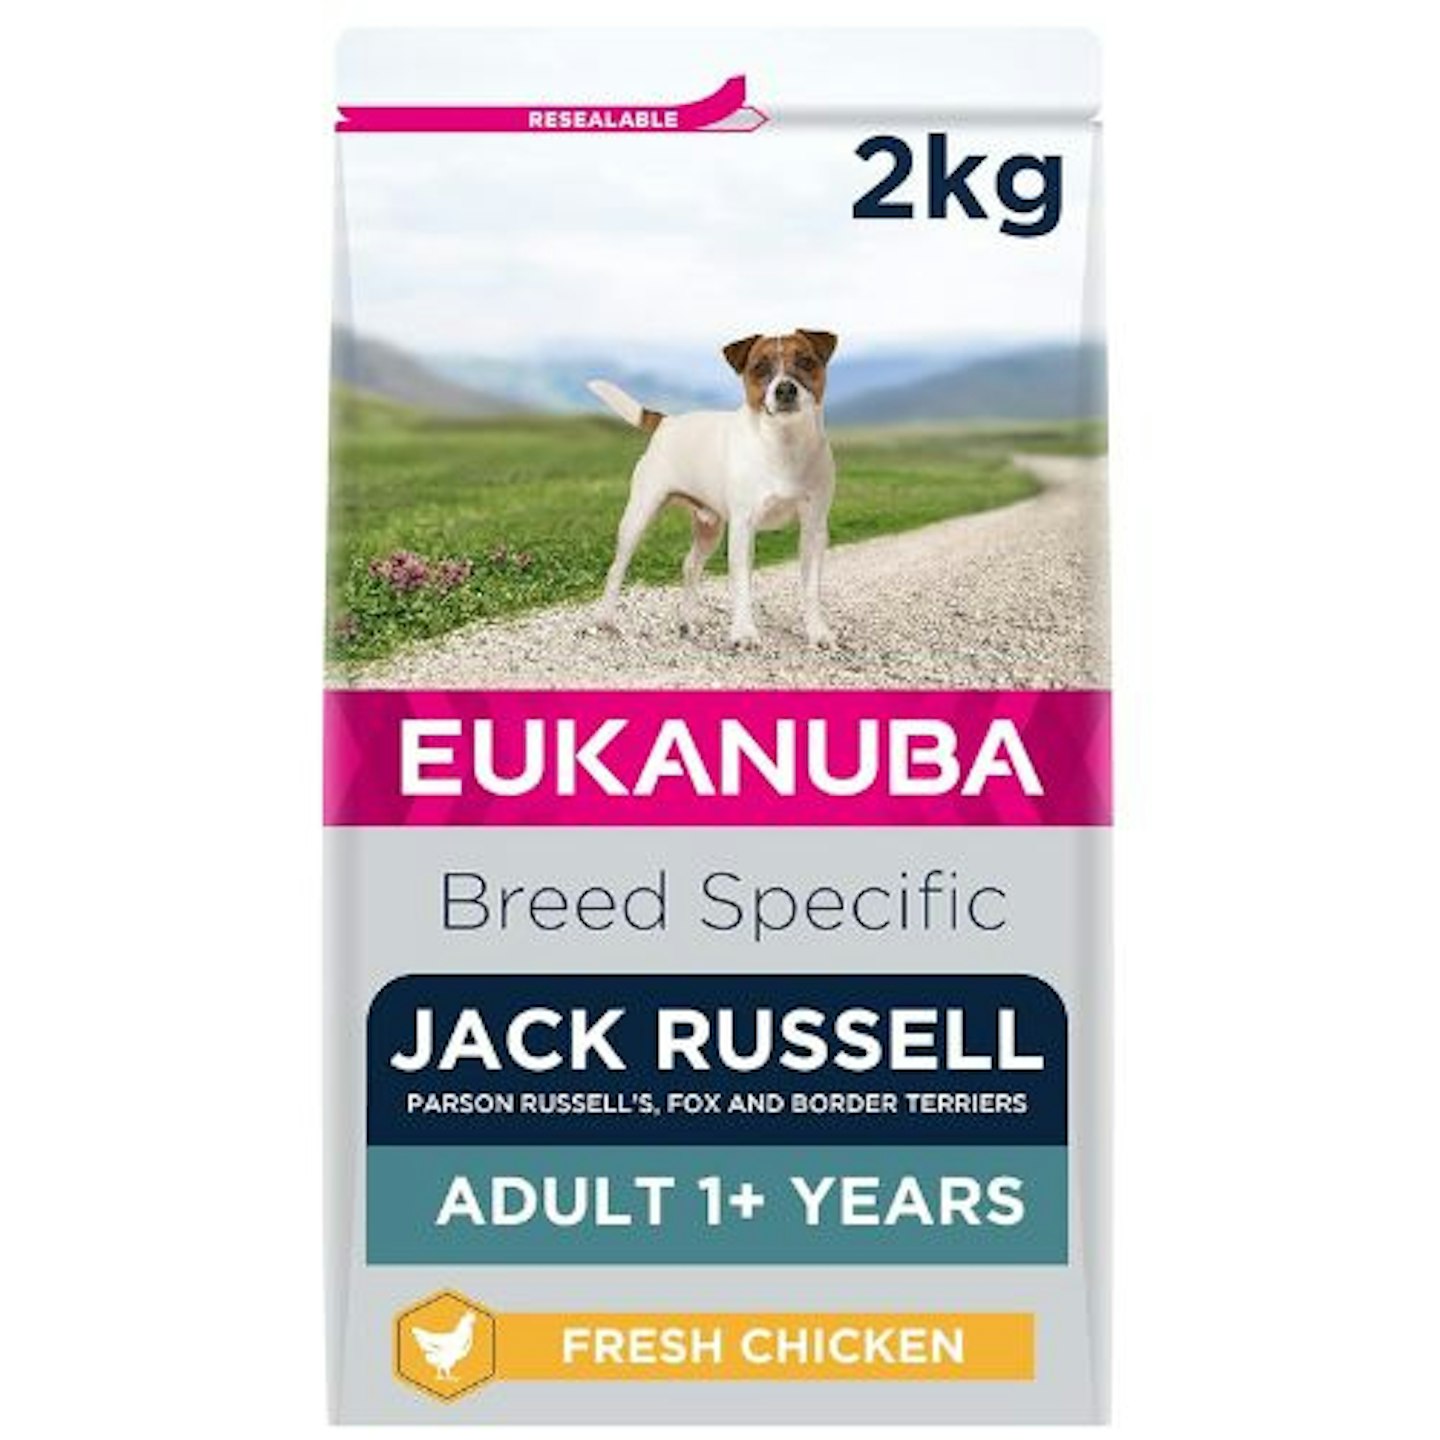 Eukanuba Complete Dry Dog Food for Adult Jack Russell Breed Types